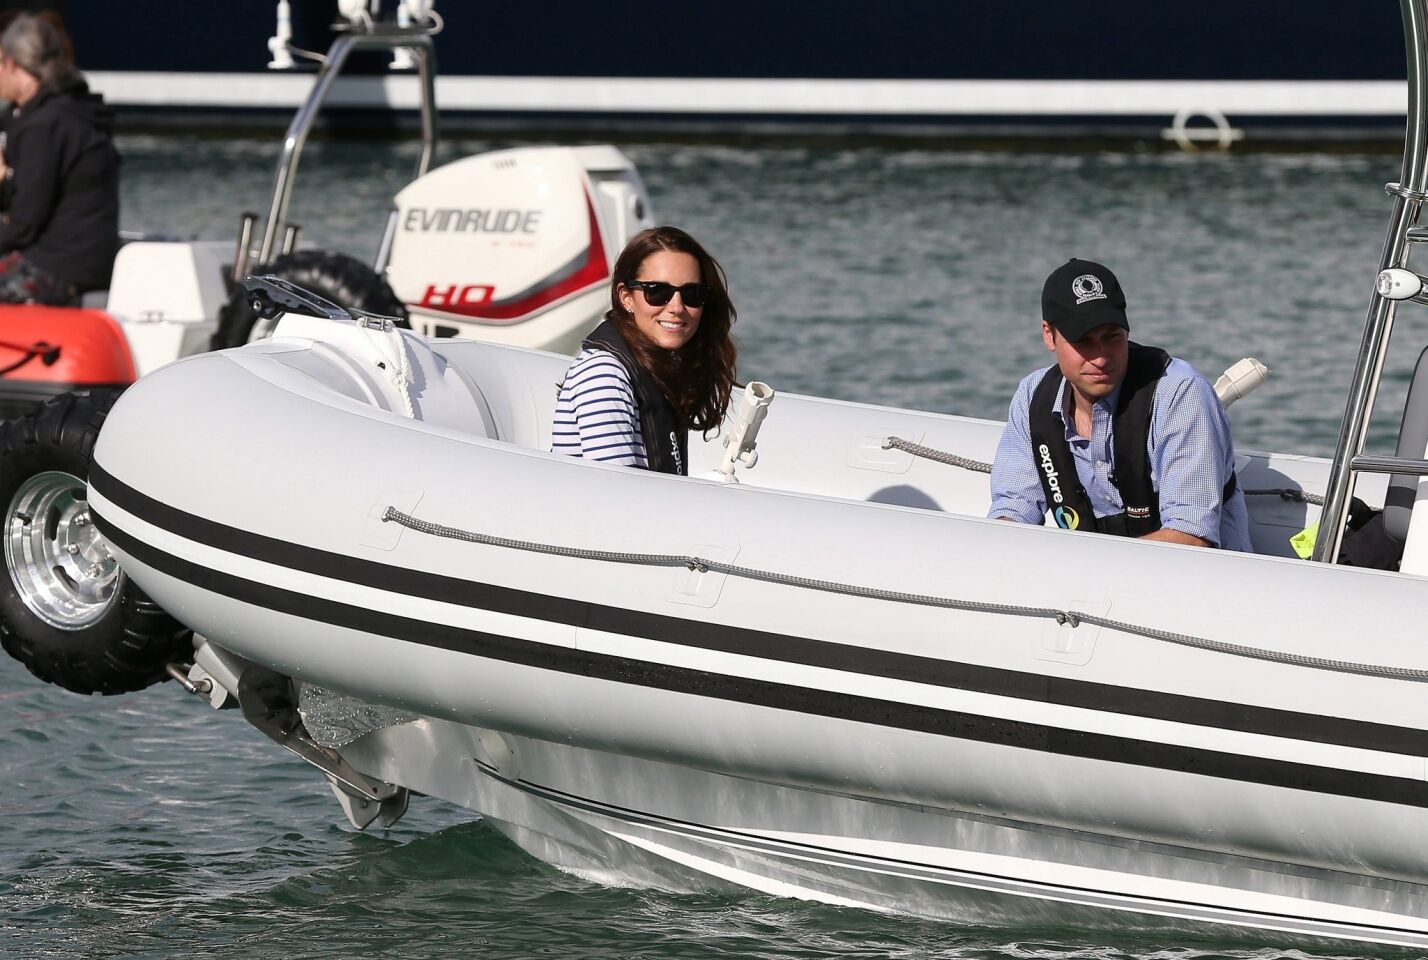 The couple sets off for West Park Marina in a Sealegs boat.